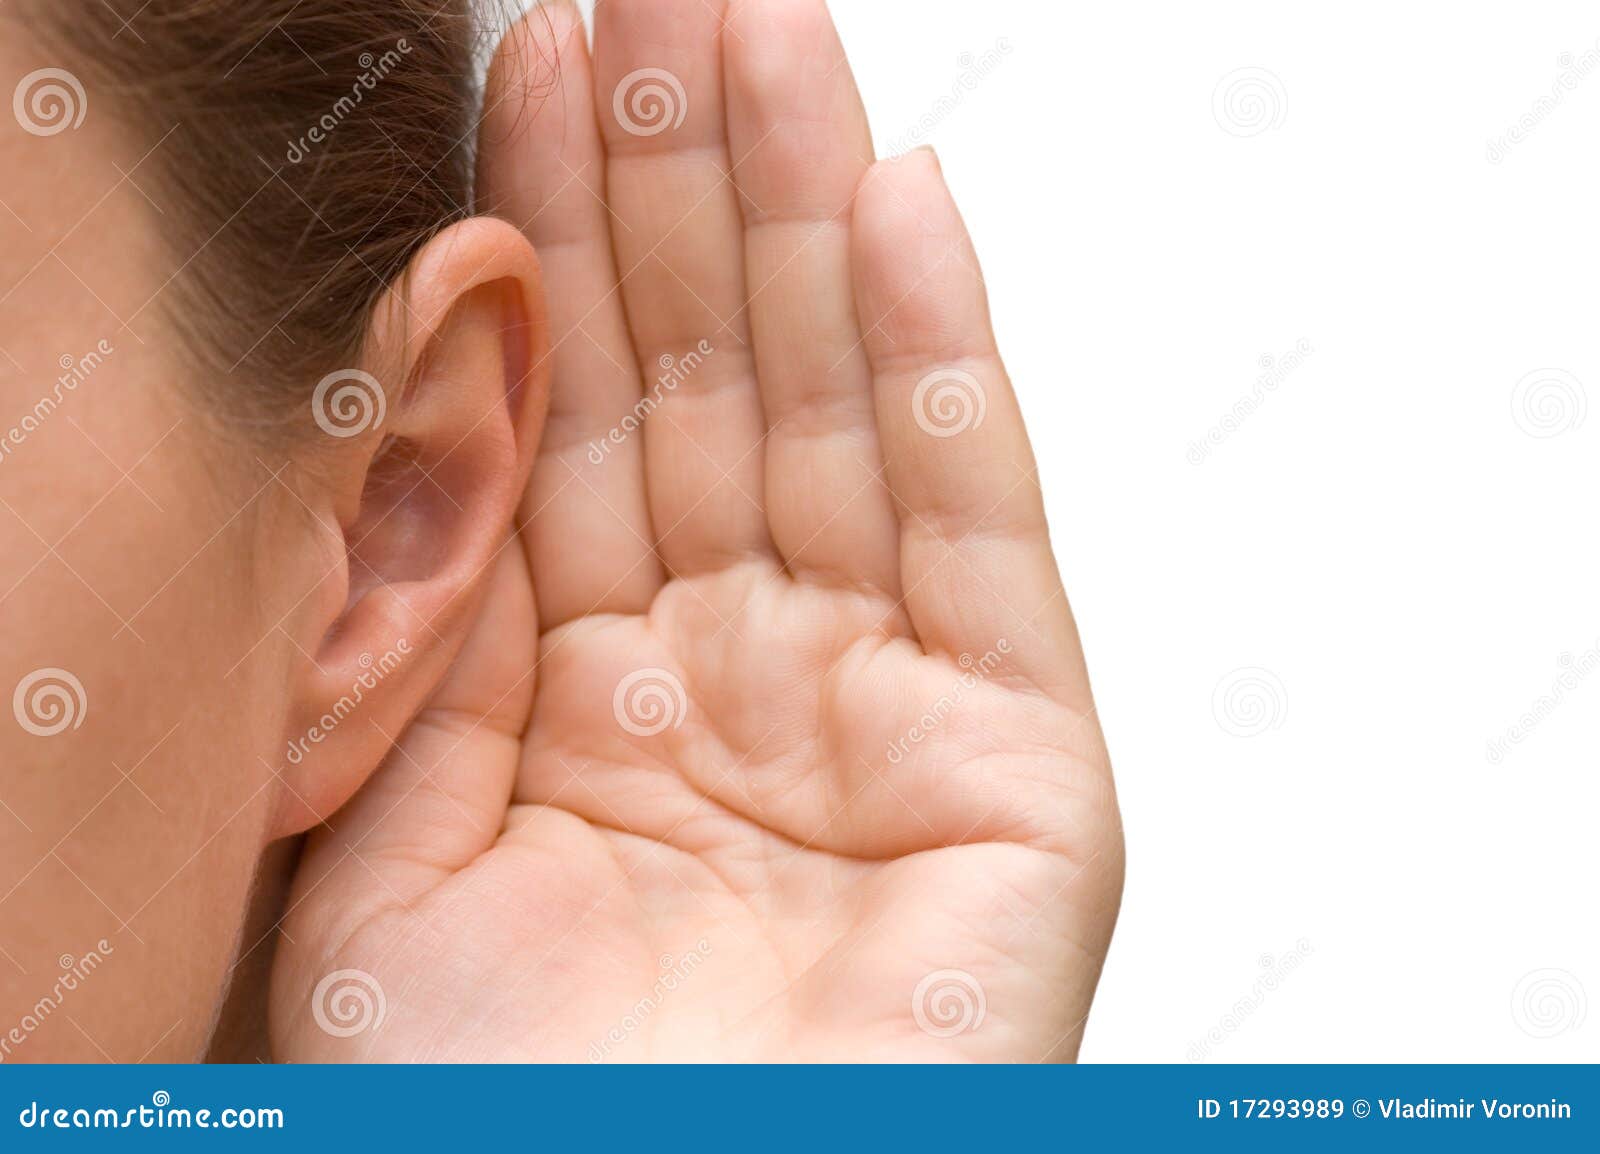 girl listening with her hand on an ear